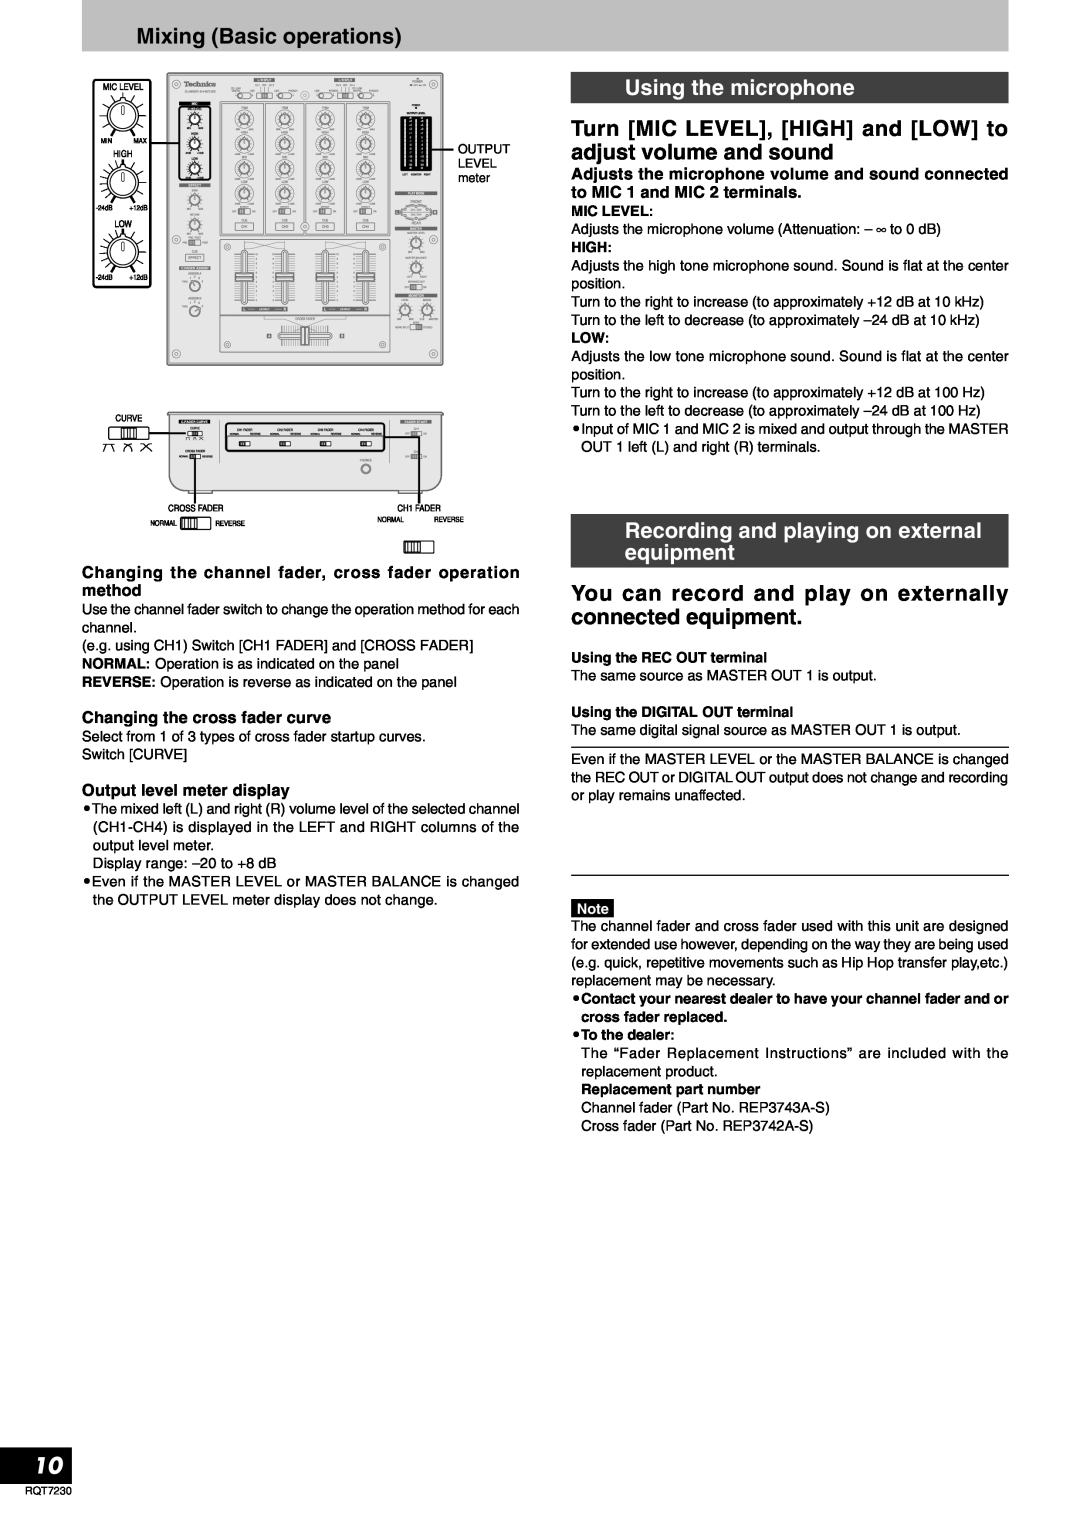 Panasonic RQT7230-3Y, SH-MZ1200 operating instructions Using the microphone, Recording and playing on external equipment 